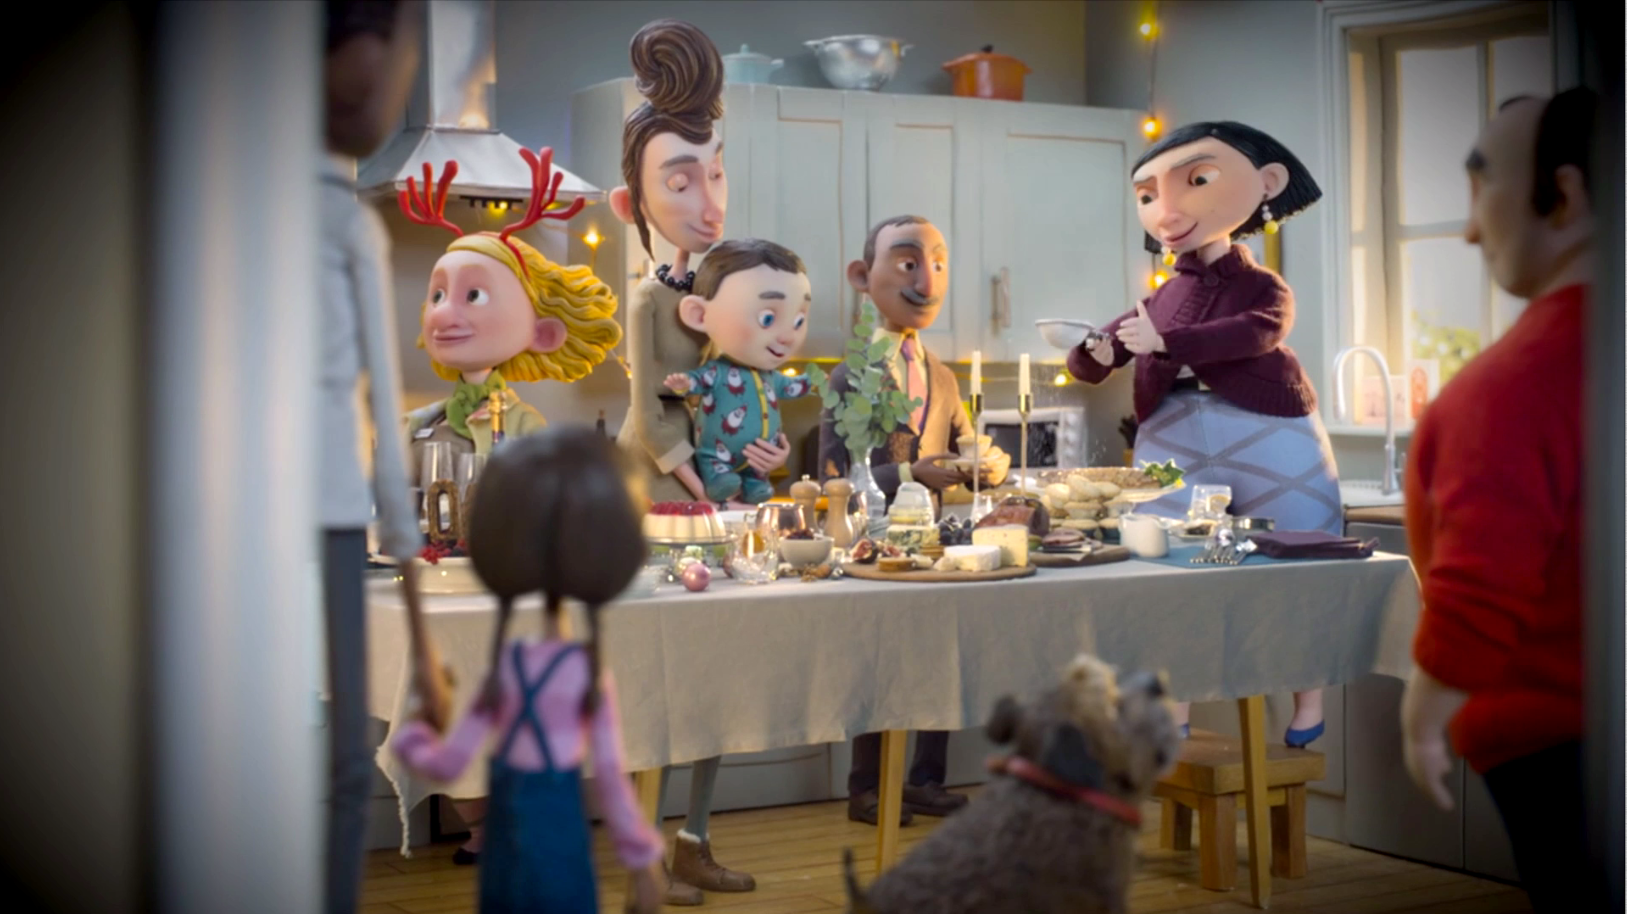 Image featuring the stop-animation family of the main advert. 